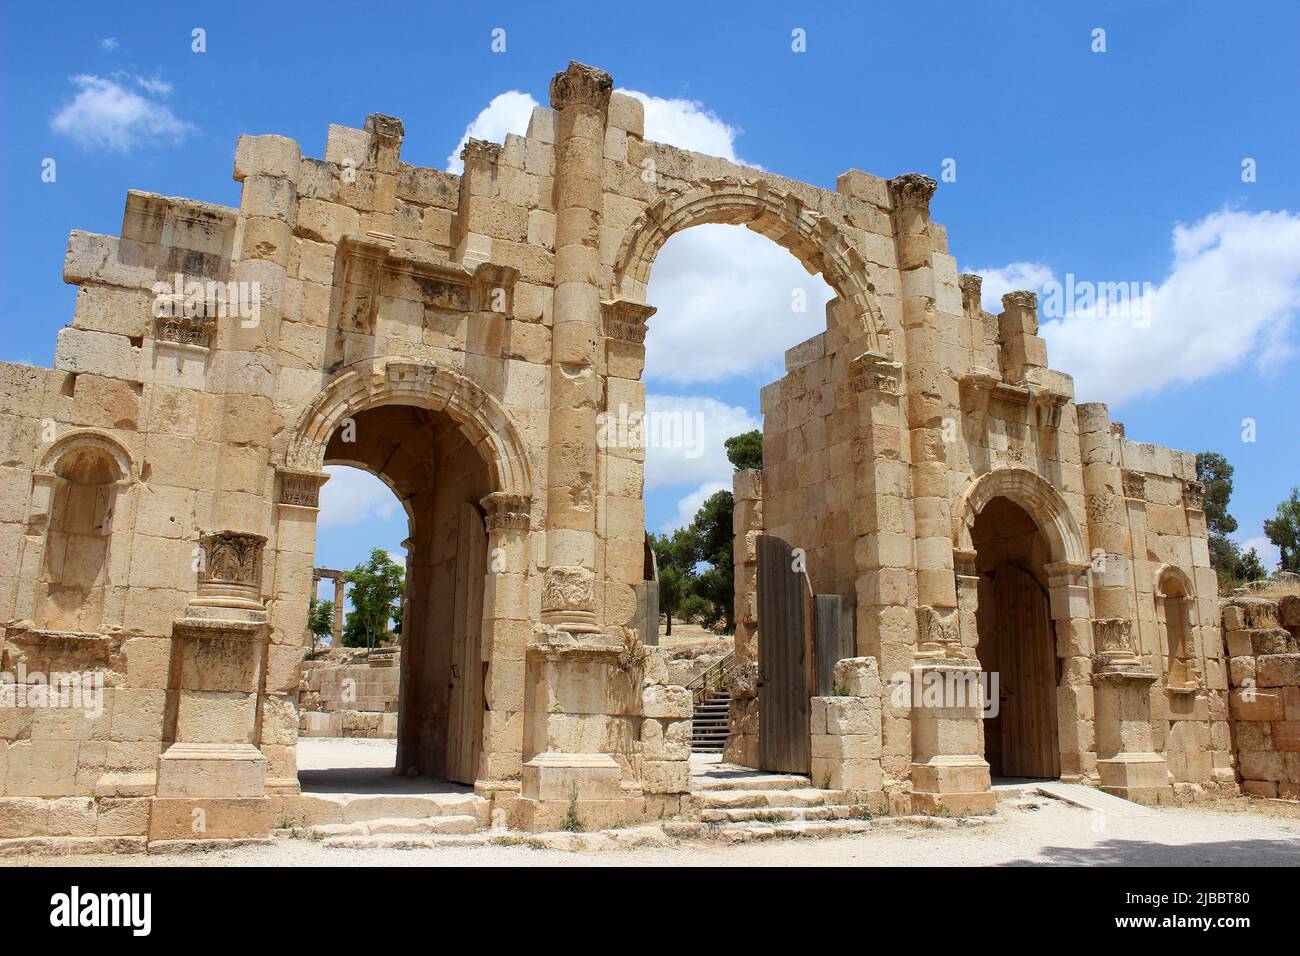 South Gate at the ancient Roman City of Jerash, Jordan, Middle East Stock Photo